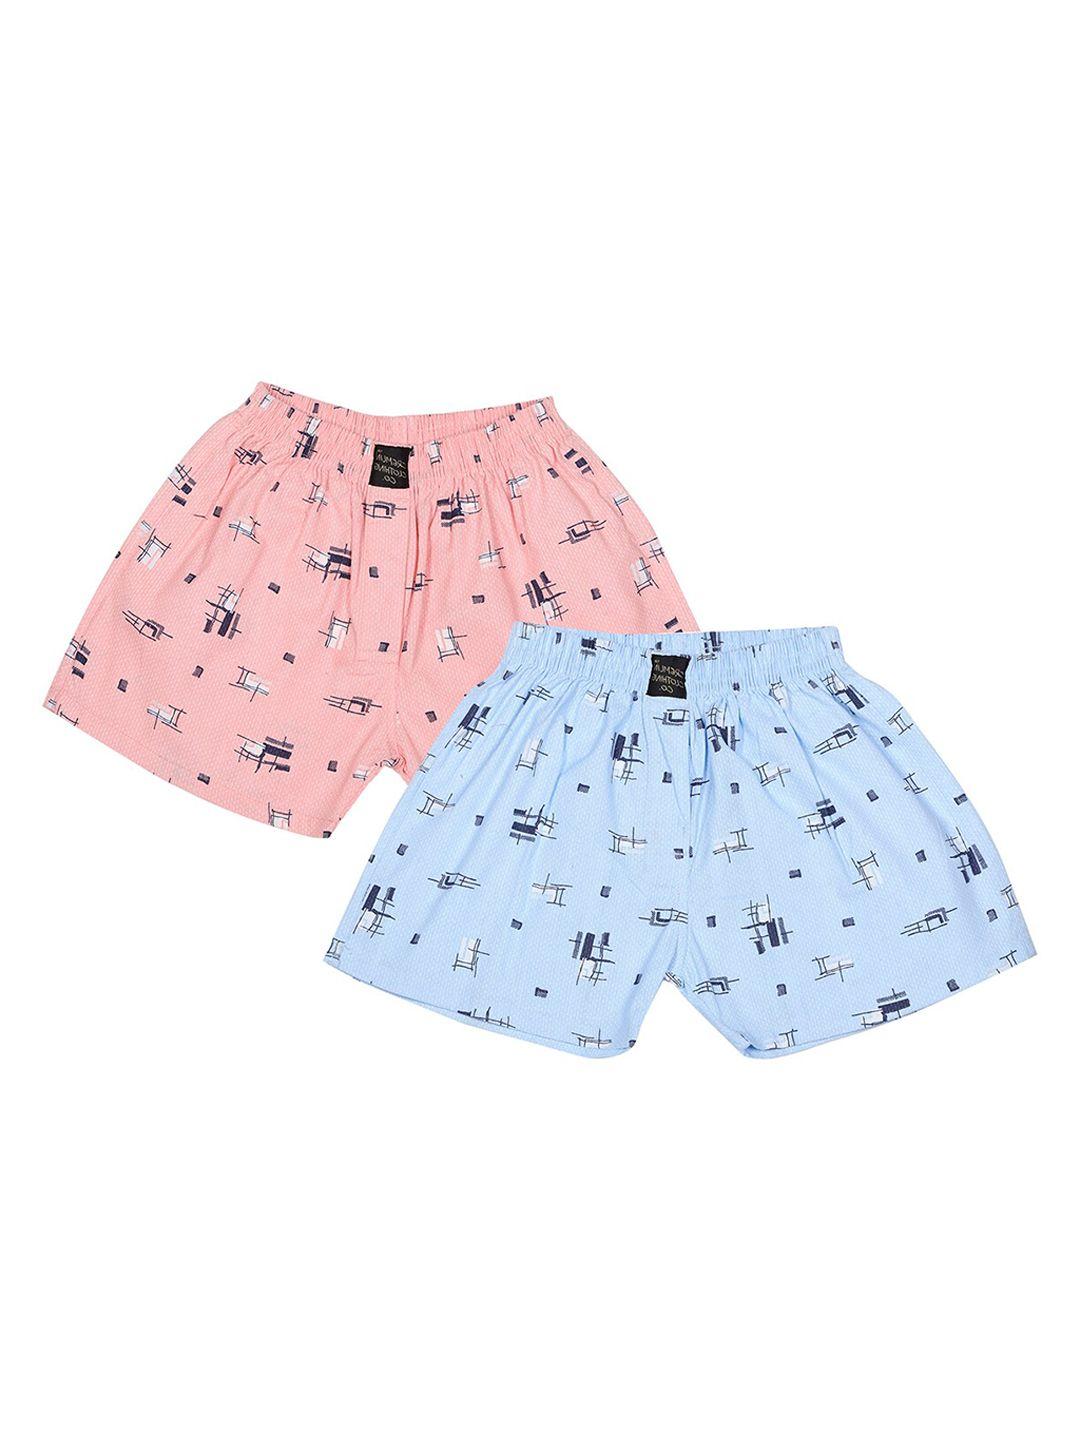 cremlin clothing boys pack of 2 printed cotton boxers